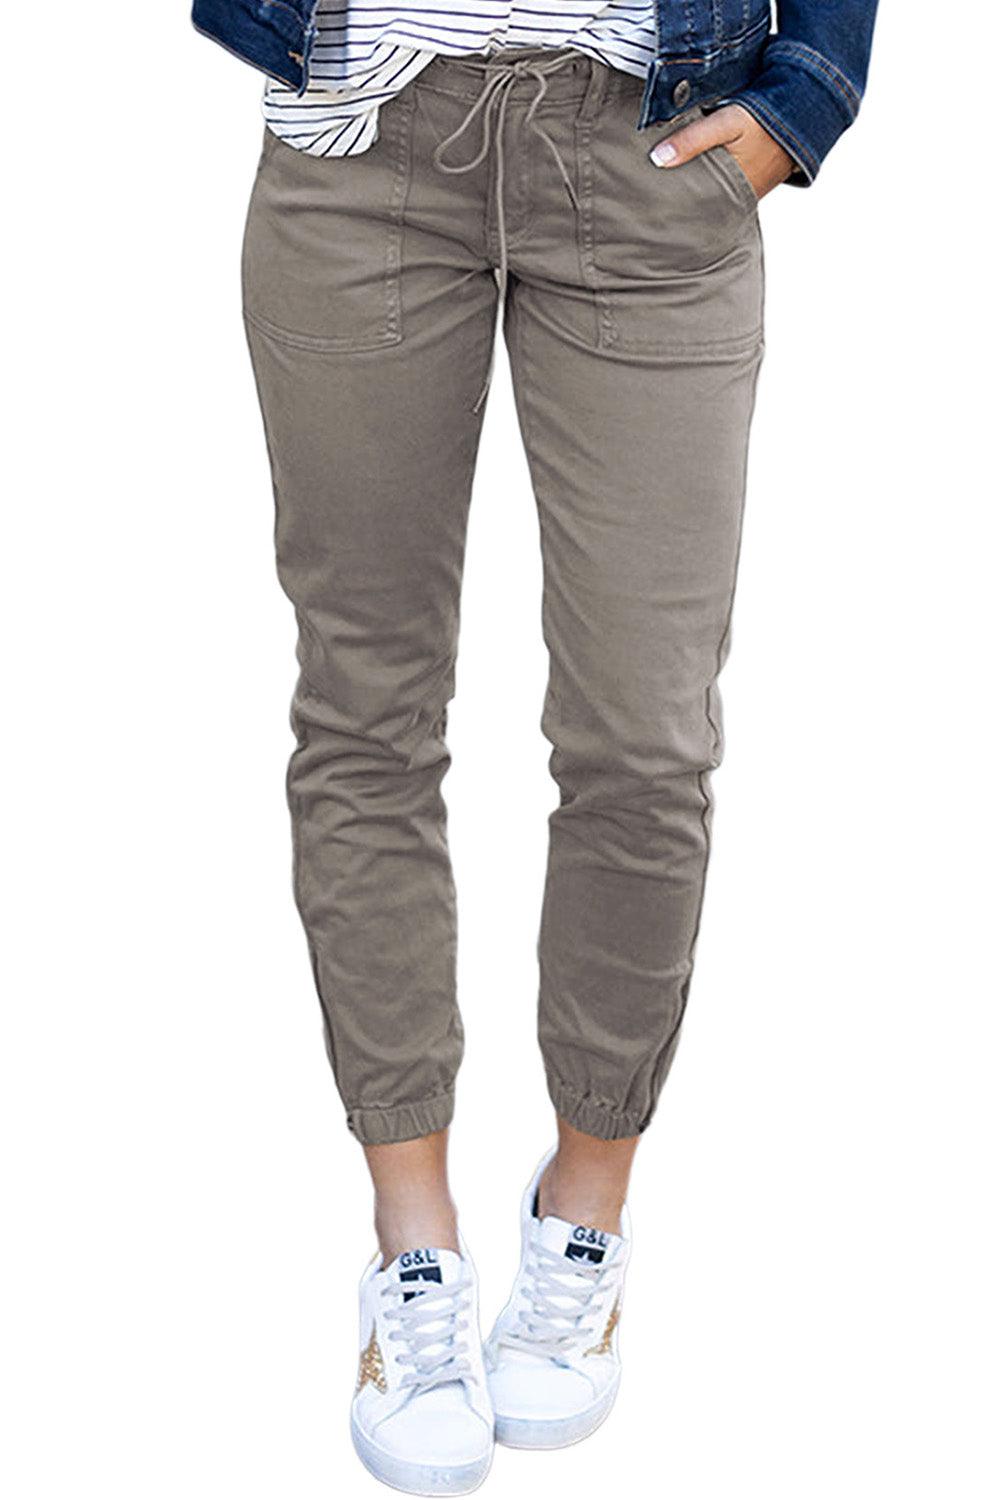 Green Slim Fit Pocketed Casual High Waisted Pants - Vesteeto